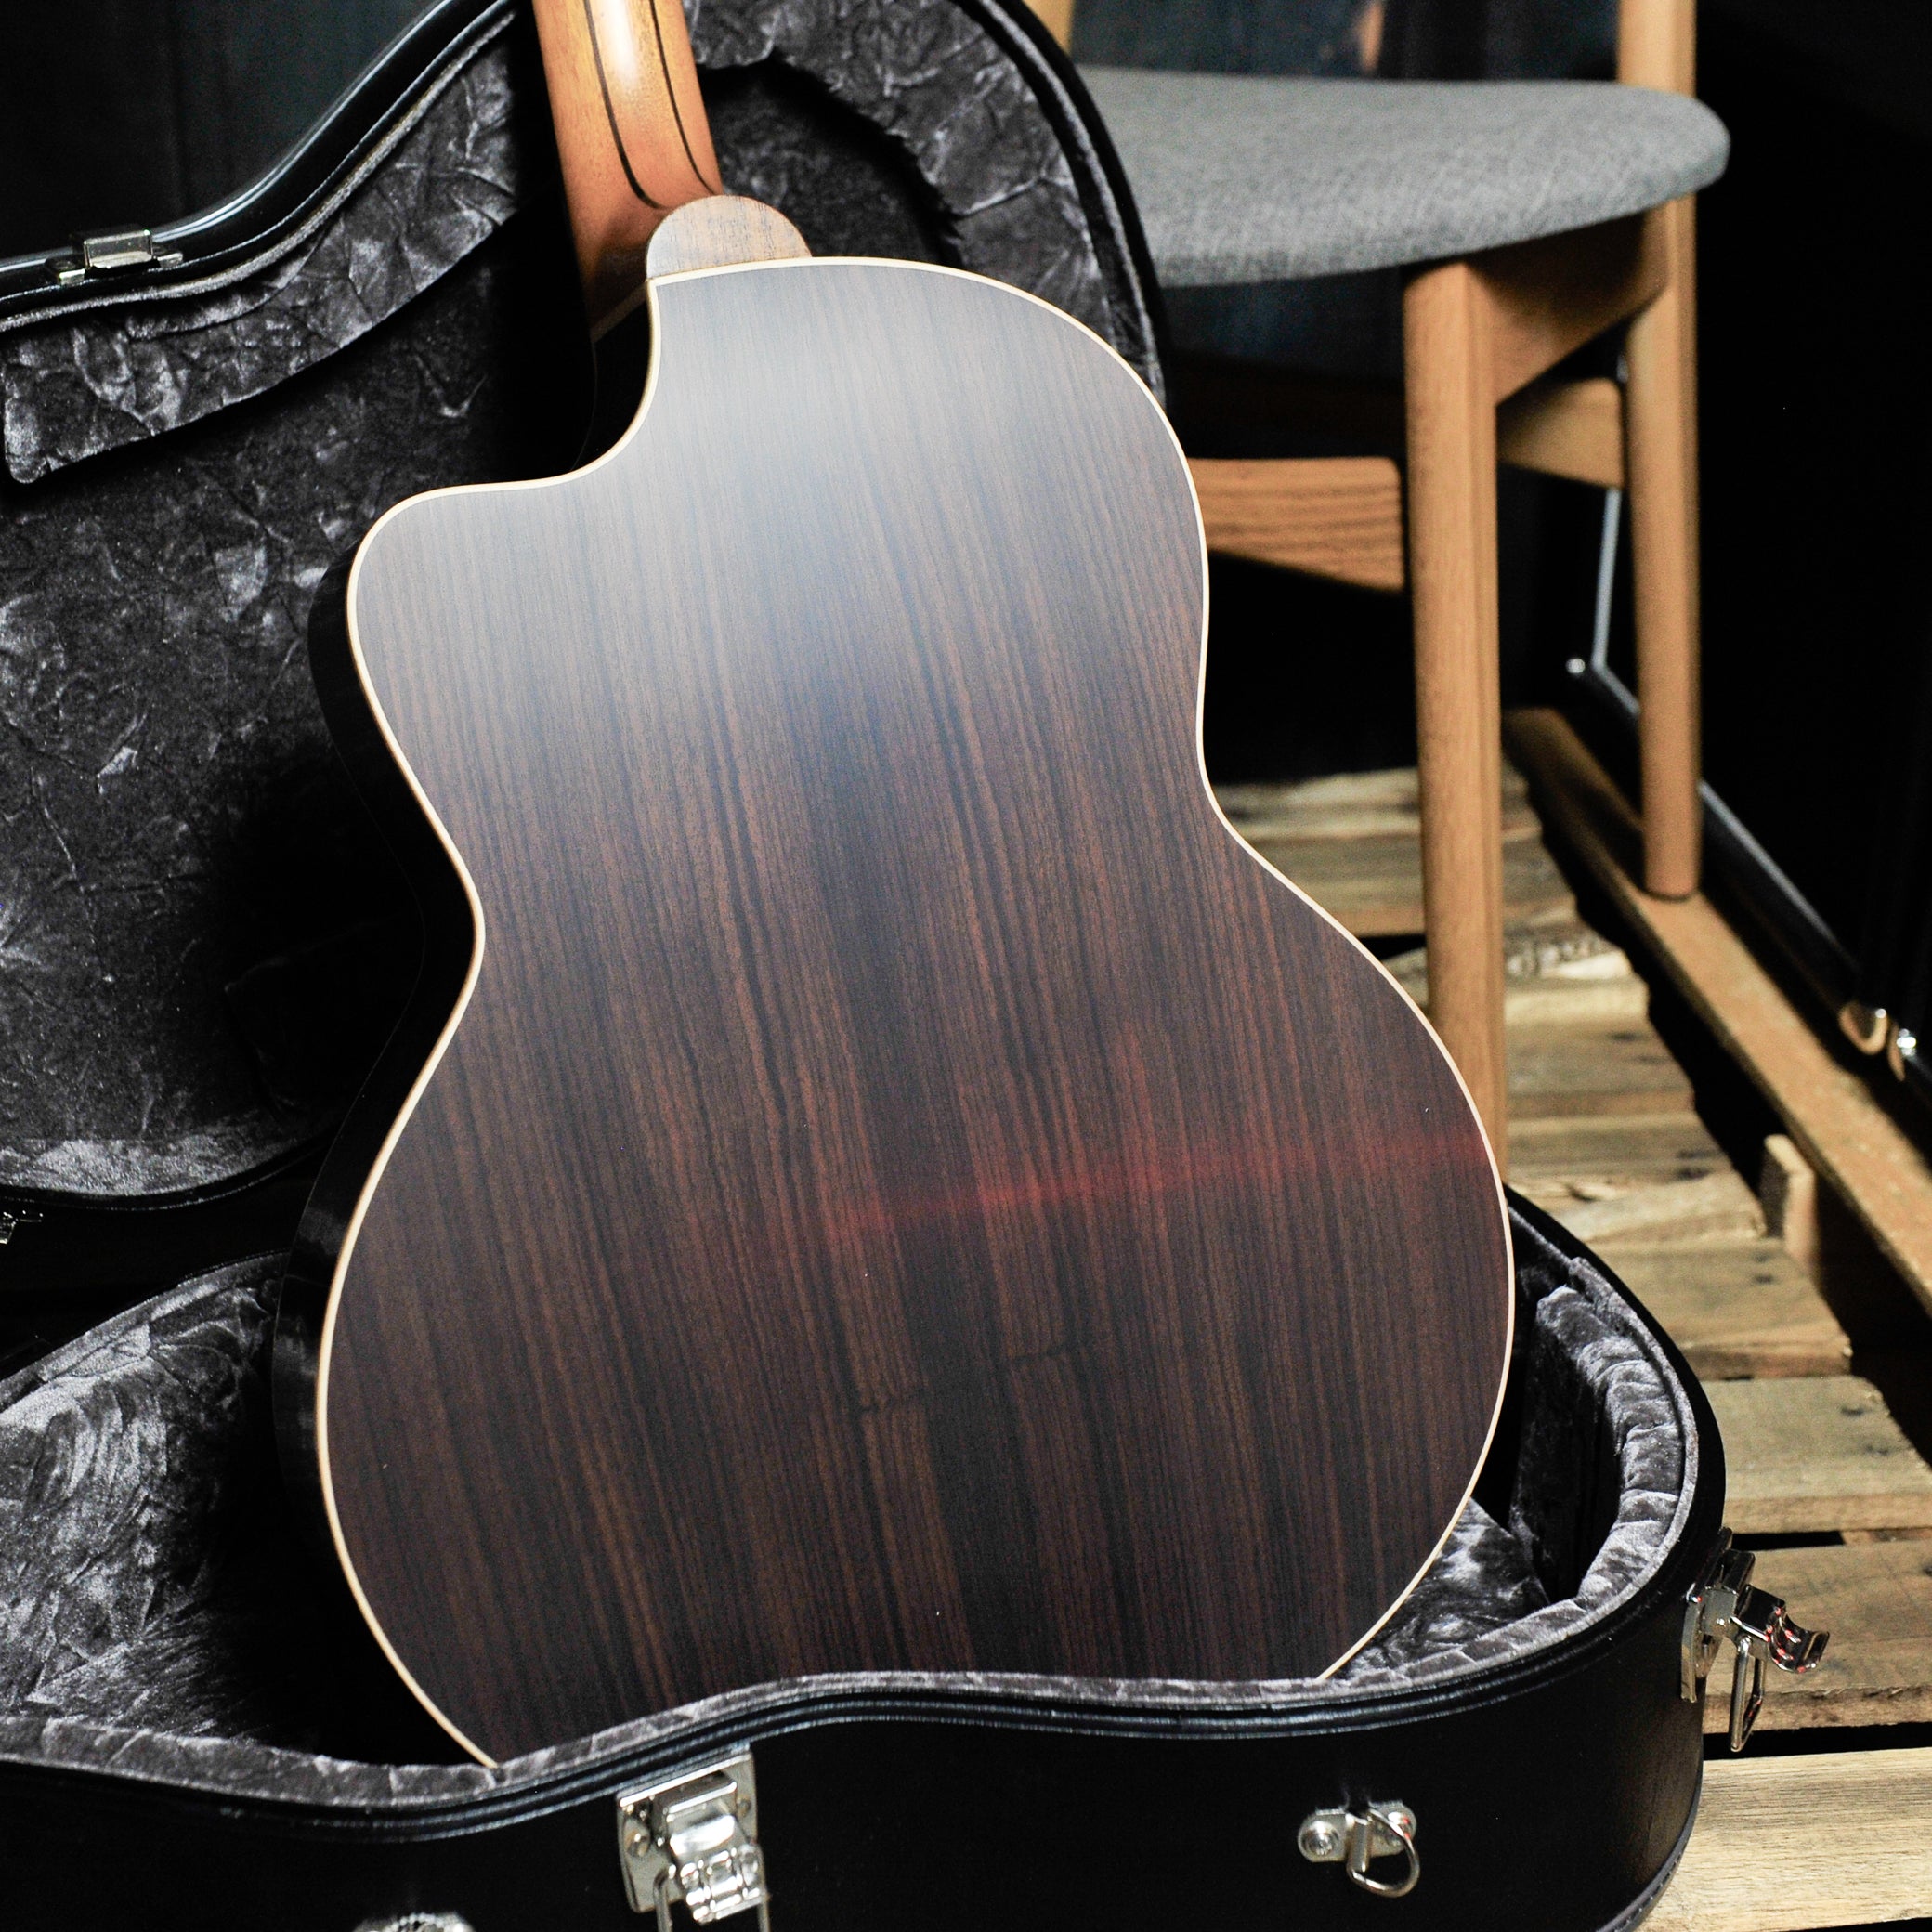 Lowden 32SE Stage Edition Cutaway Rosewood/Spruce